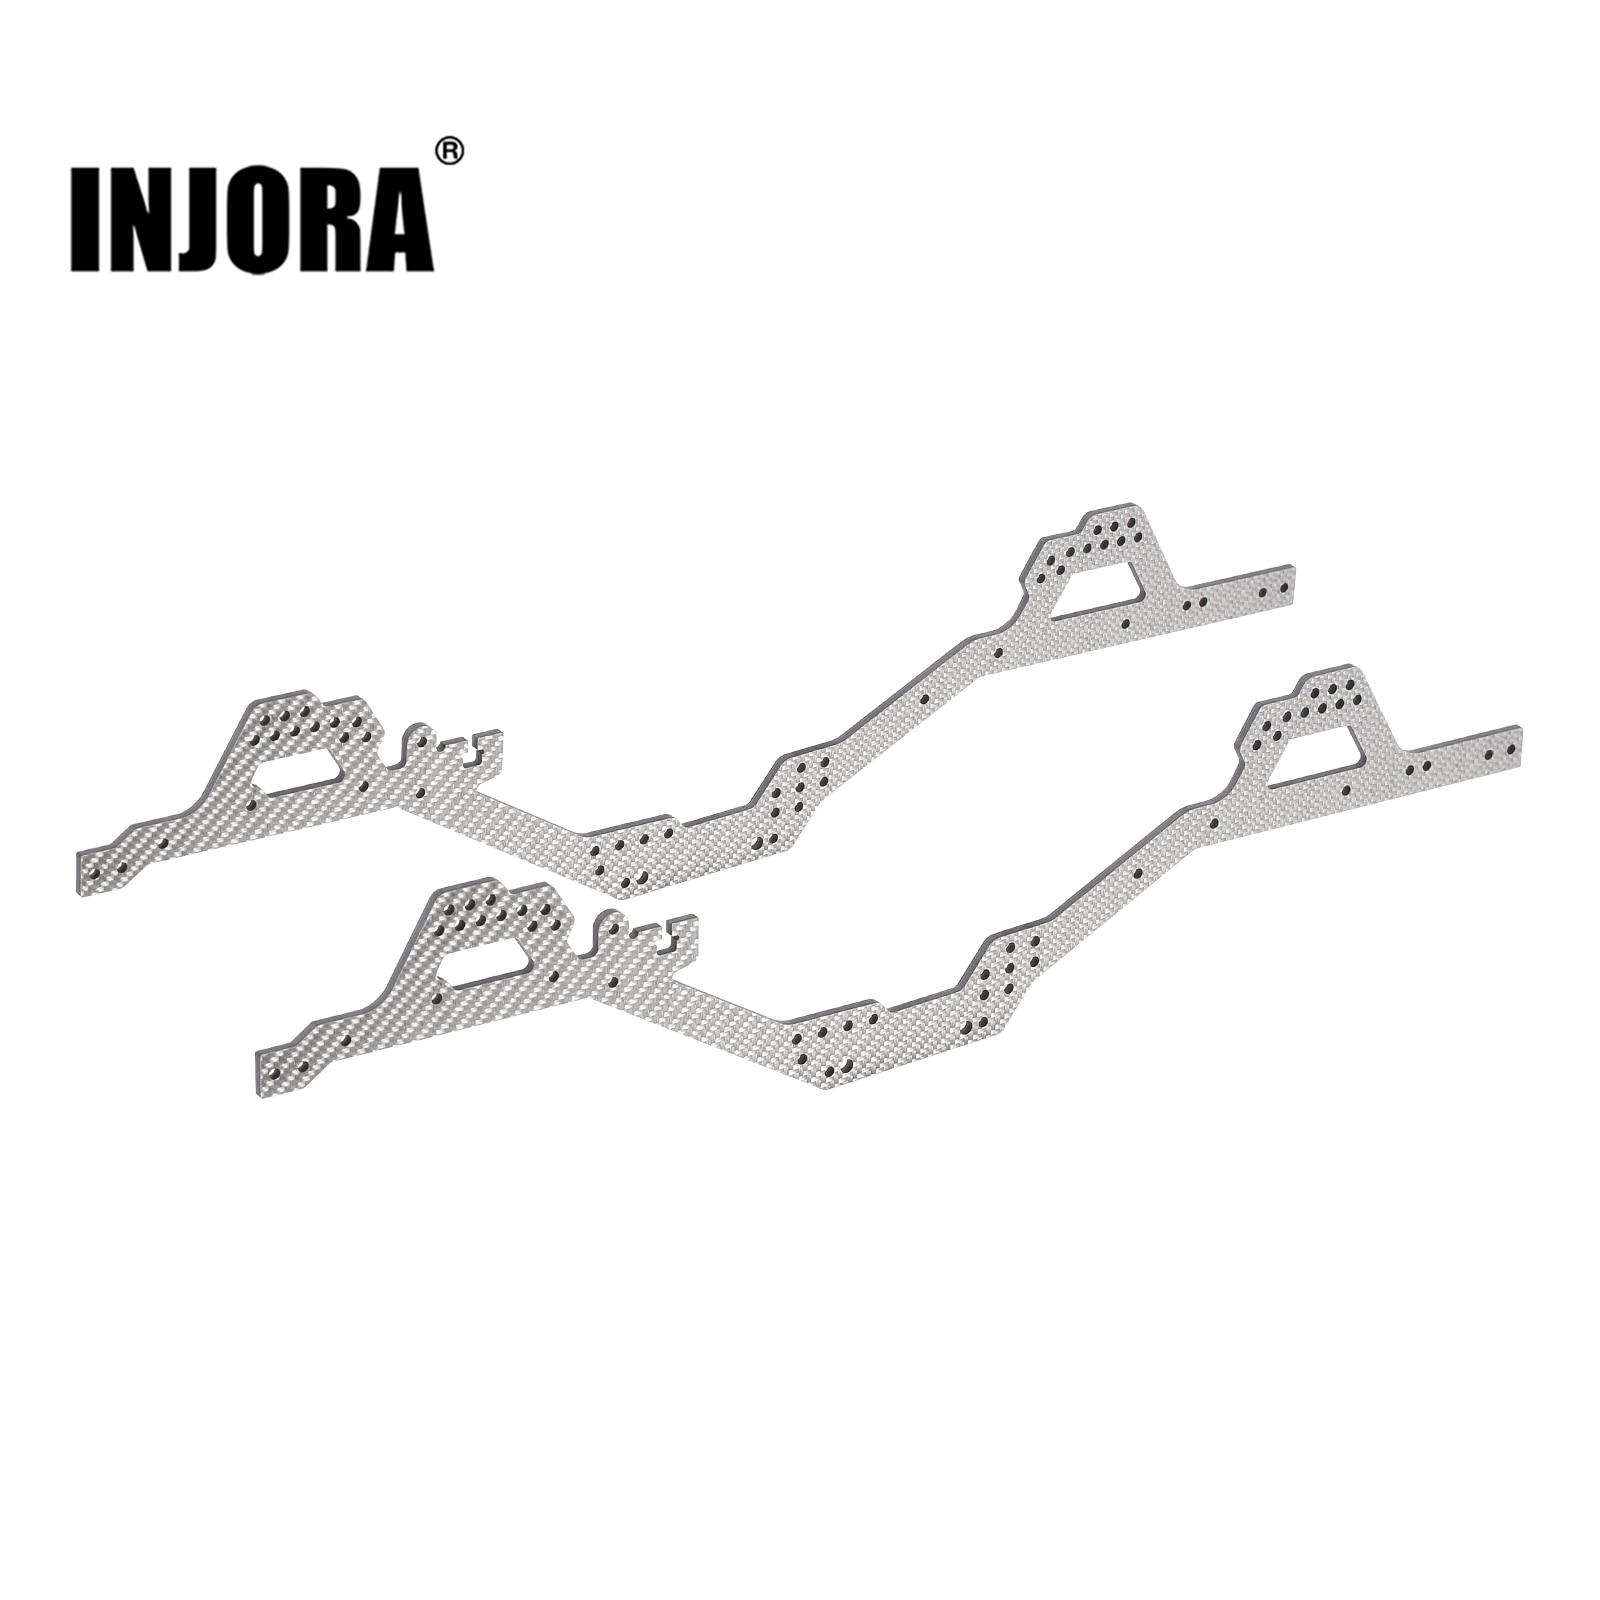 INJORA-LCG-Carbon-Fiber-Chassis-Rail-Set-with-Battery-Plate-for-1-10-RC-Crawler-Axial.jpg